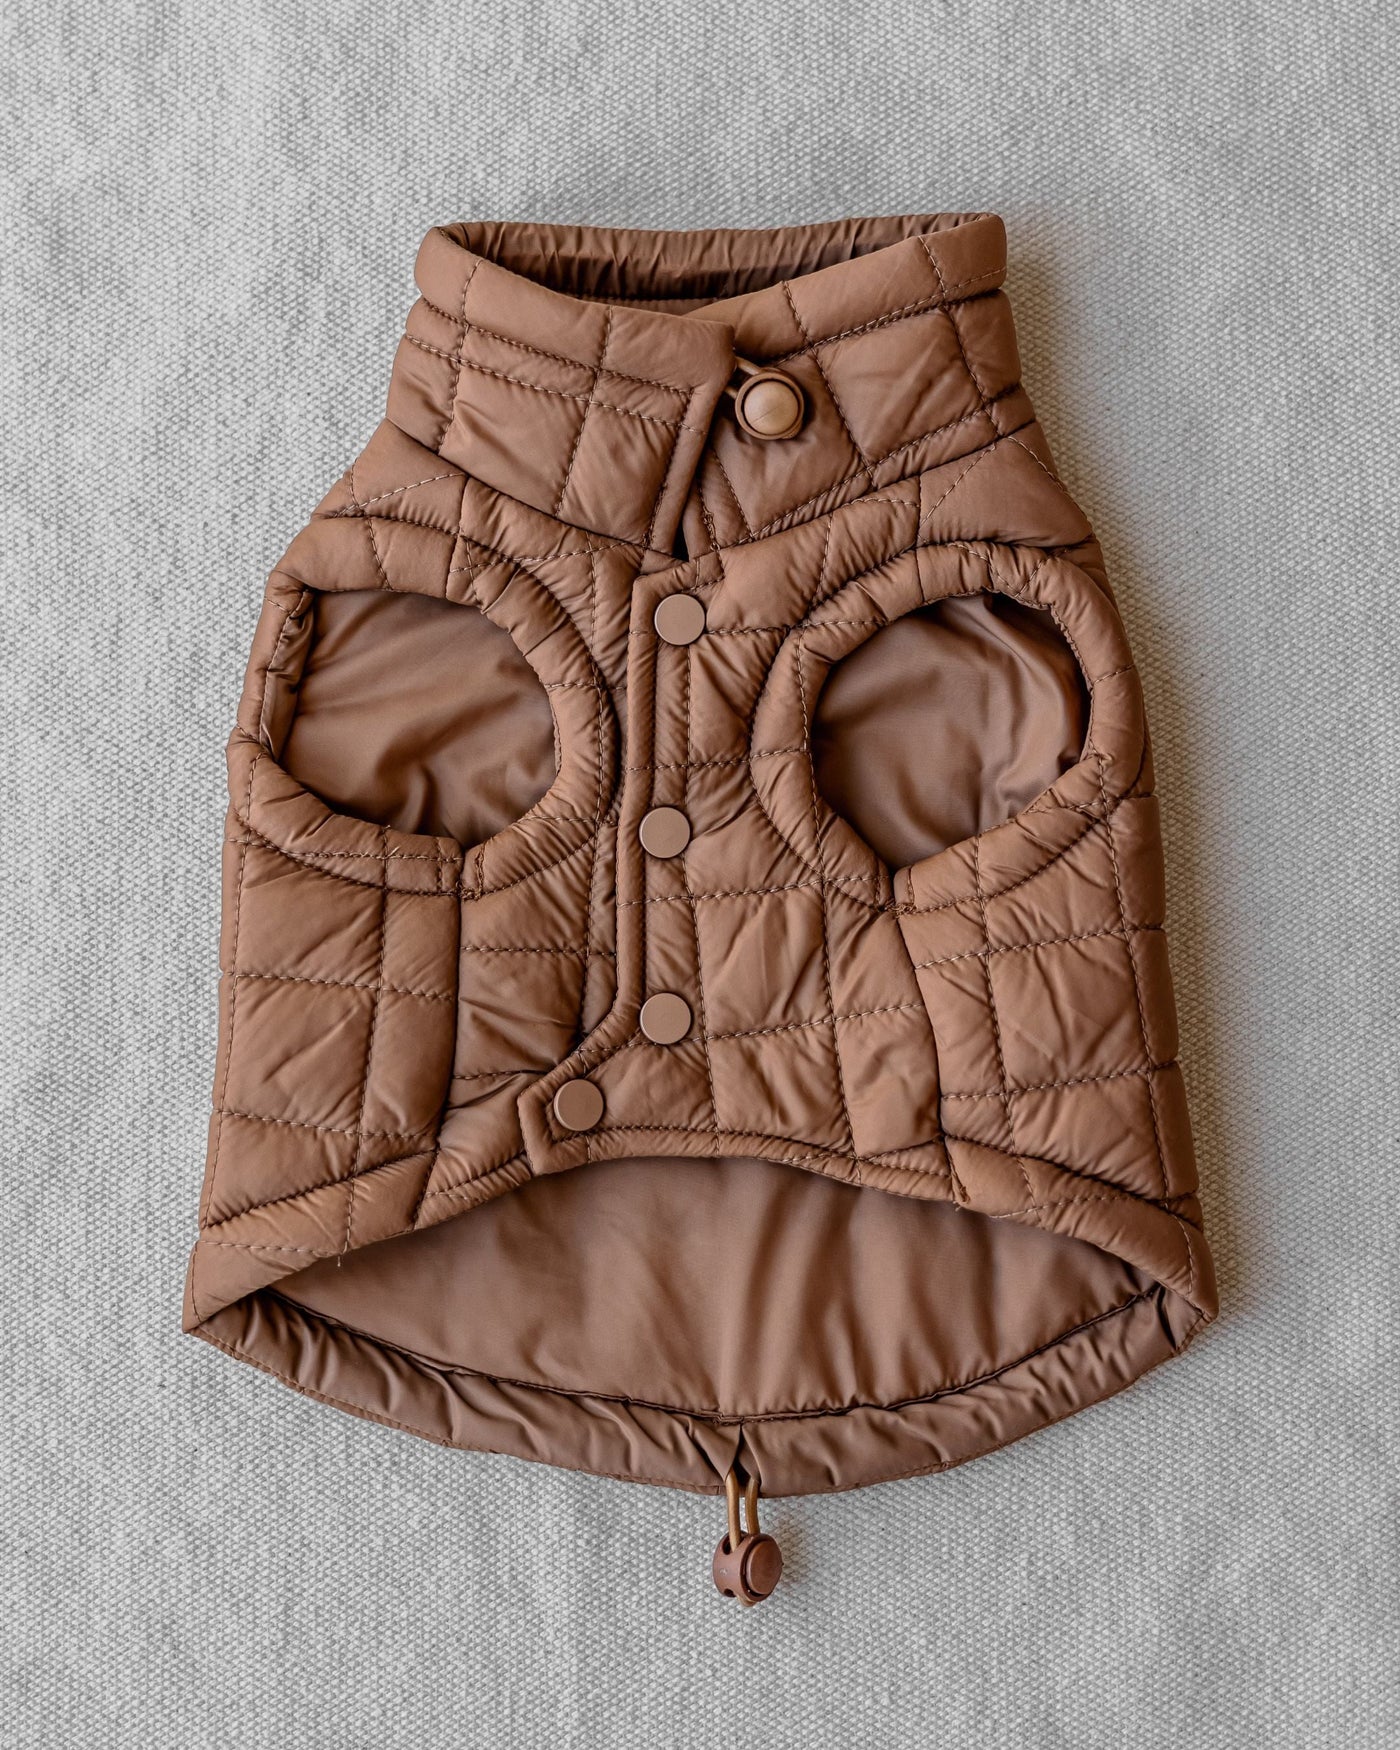 maxbone Easy Fit Jacket in Camel Image